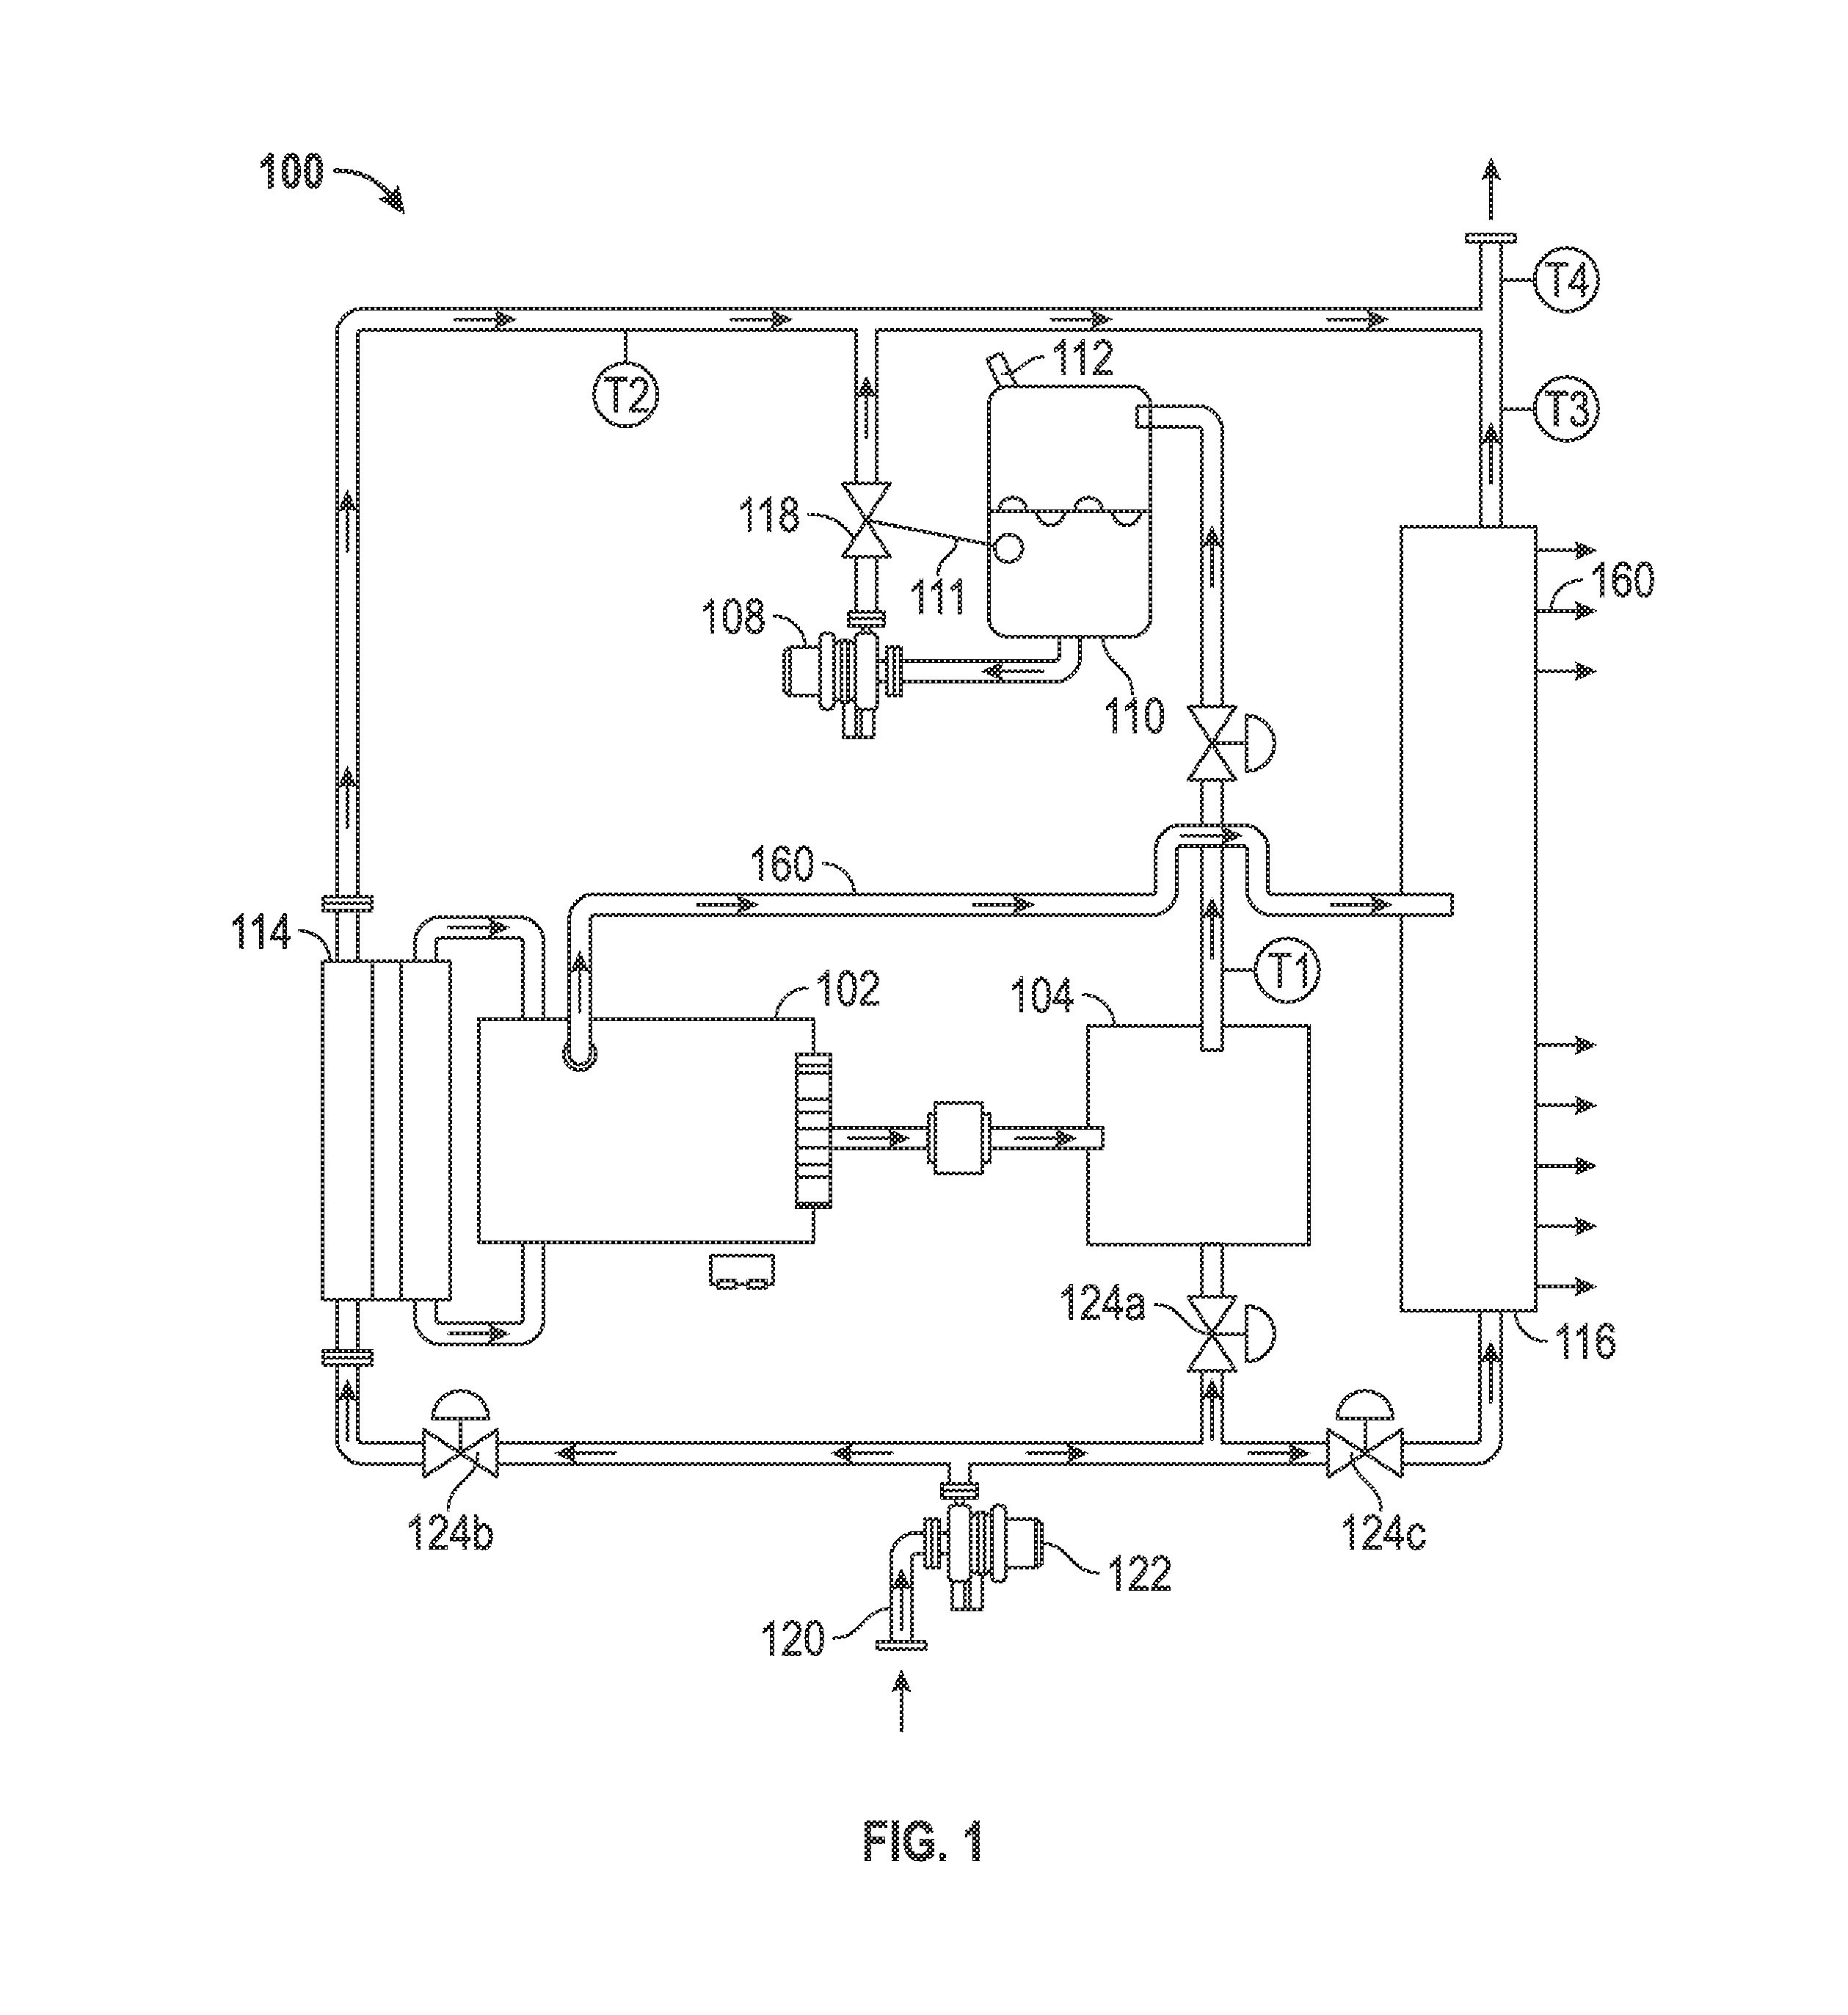 Methods and systems for heating and manipulating fluids